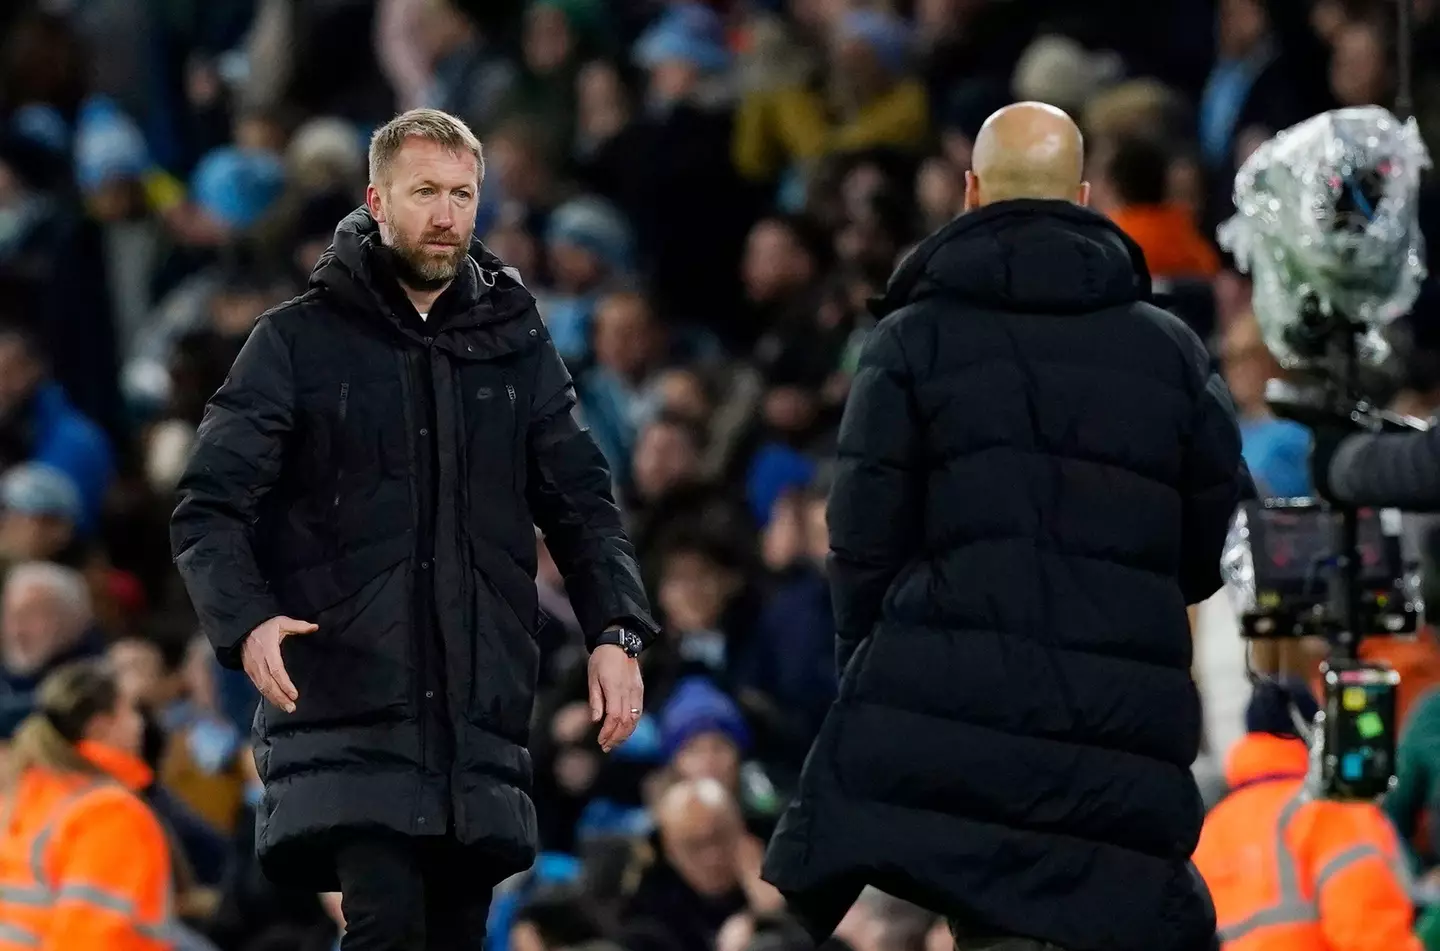 Chelsea manager Graham Potter was outclassed by Manchester City boss Pep Guardiola in the FA Cup.